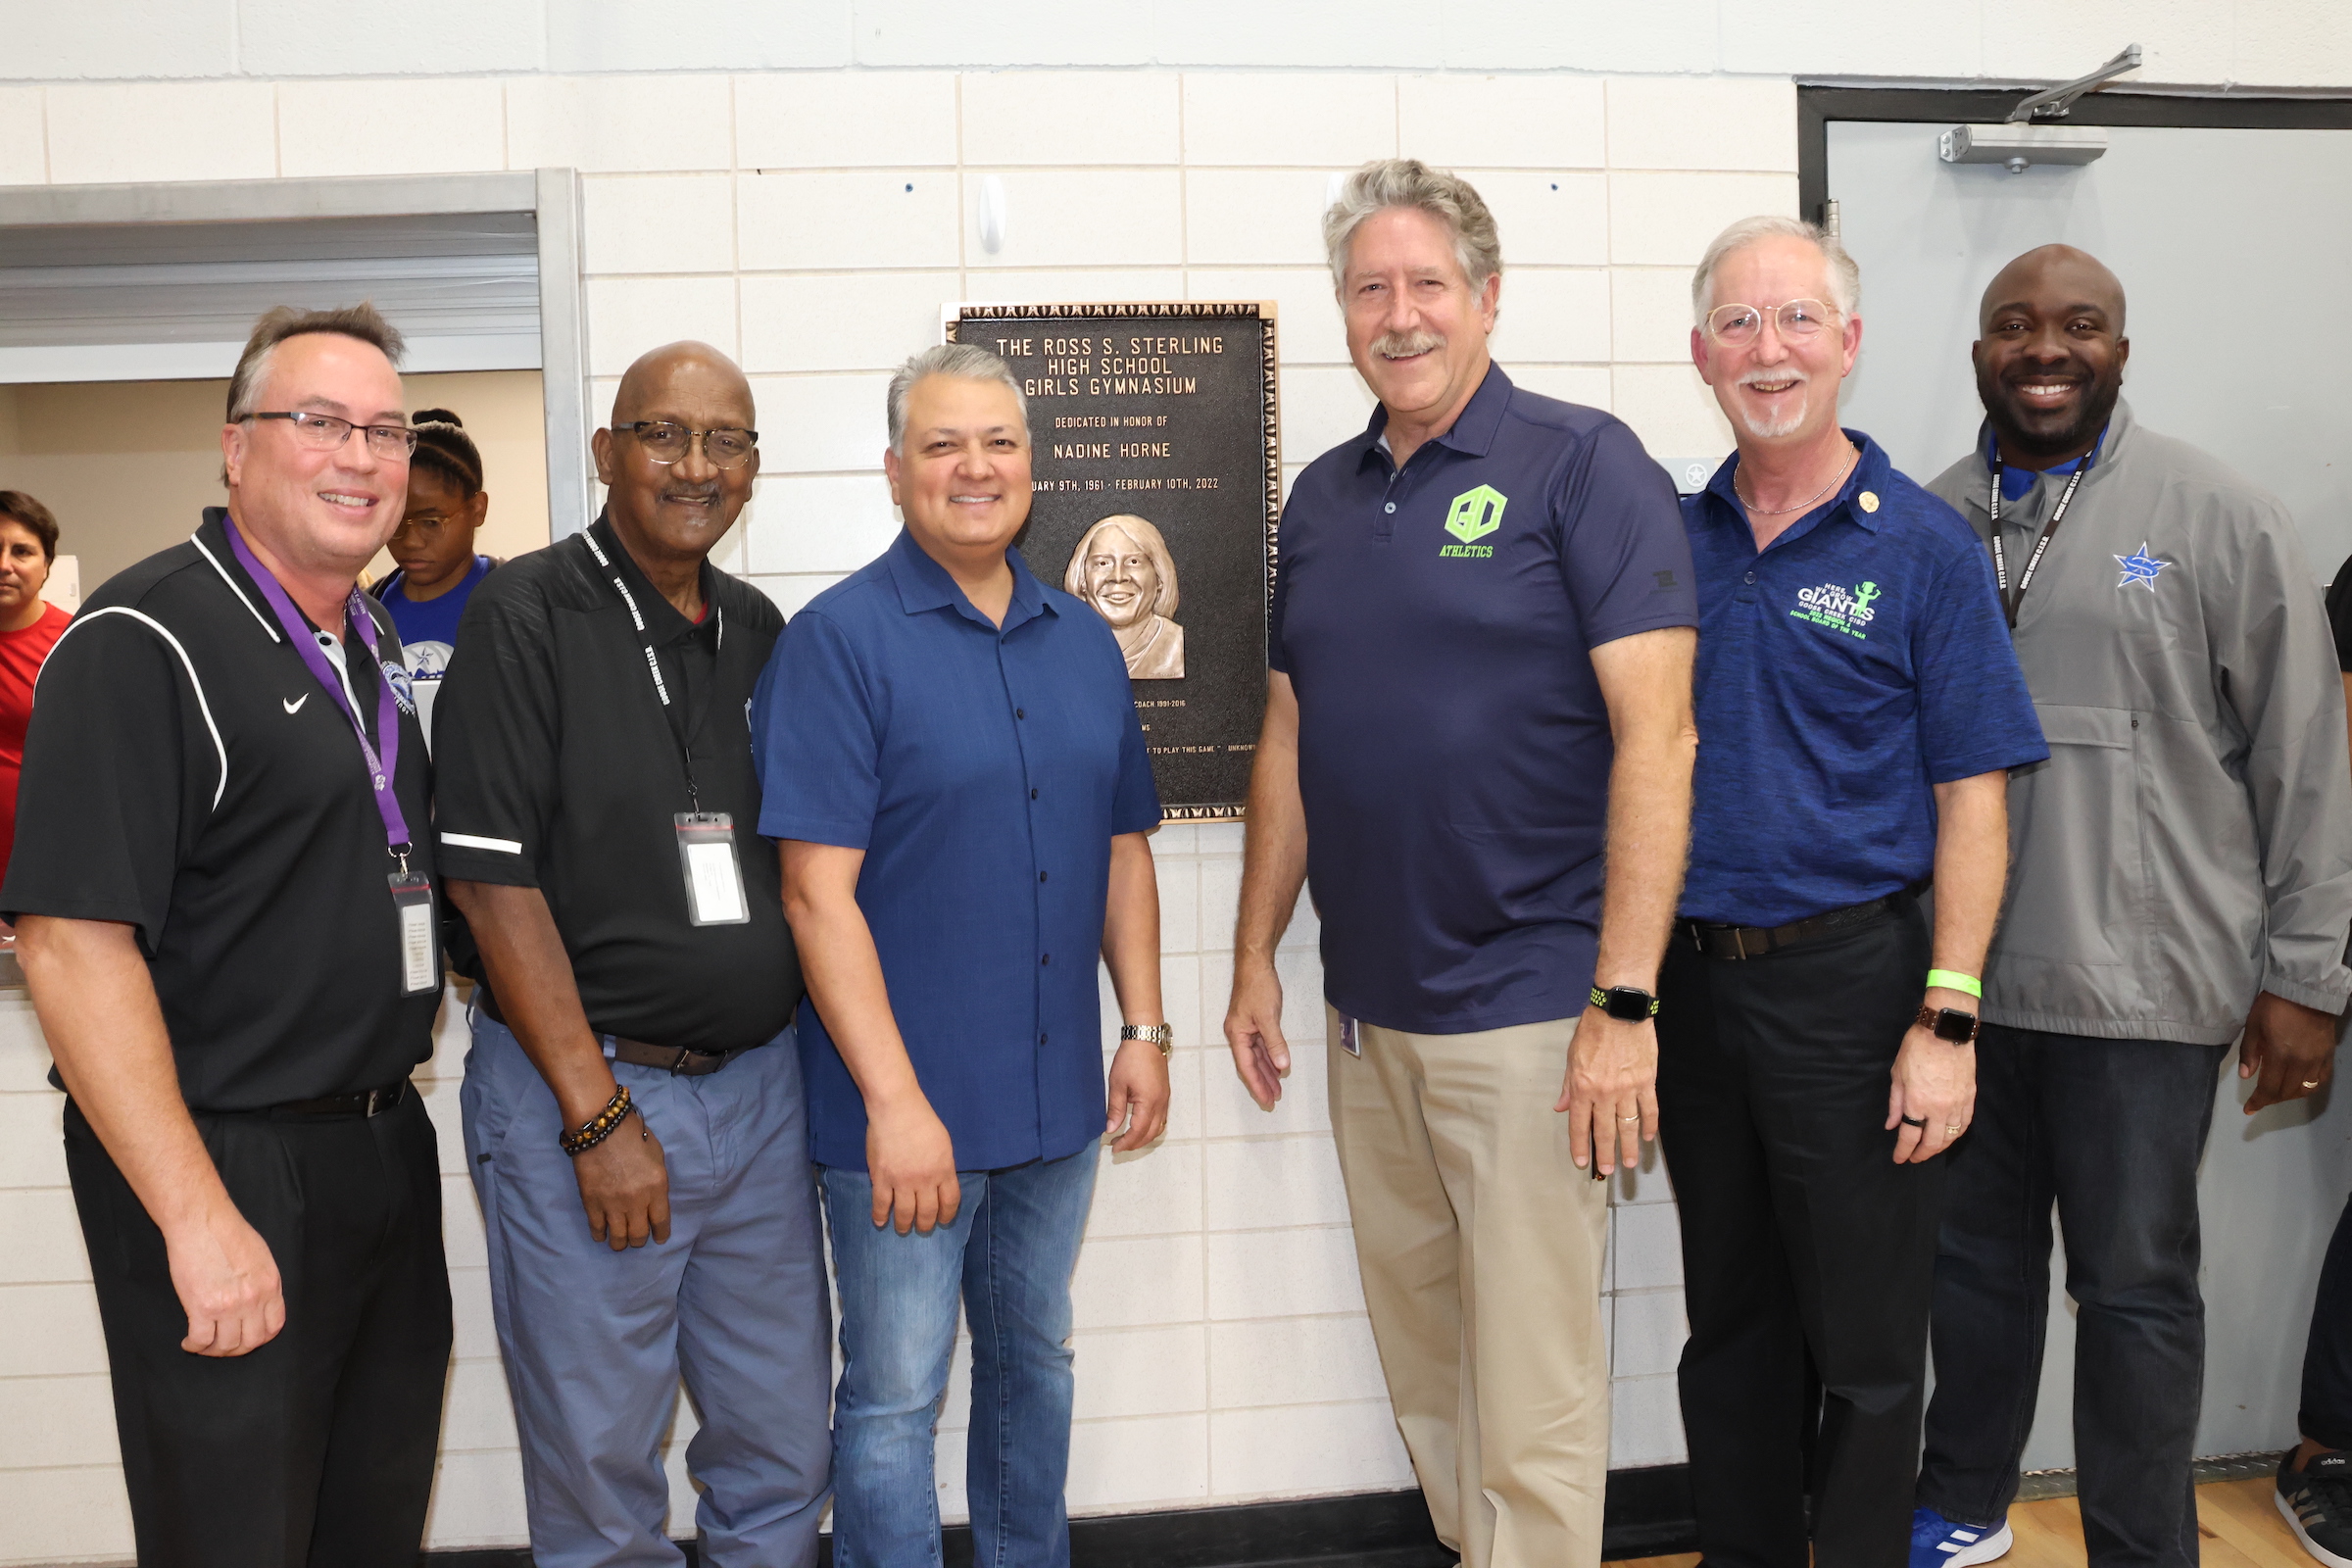 District admin and board members pose with nadine horne plaque in sterling gym